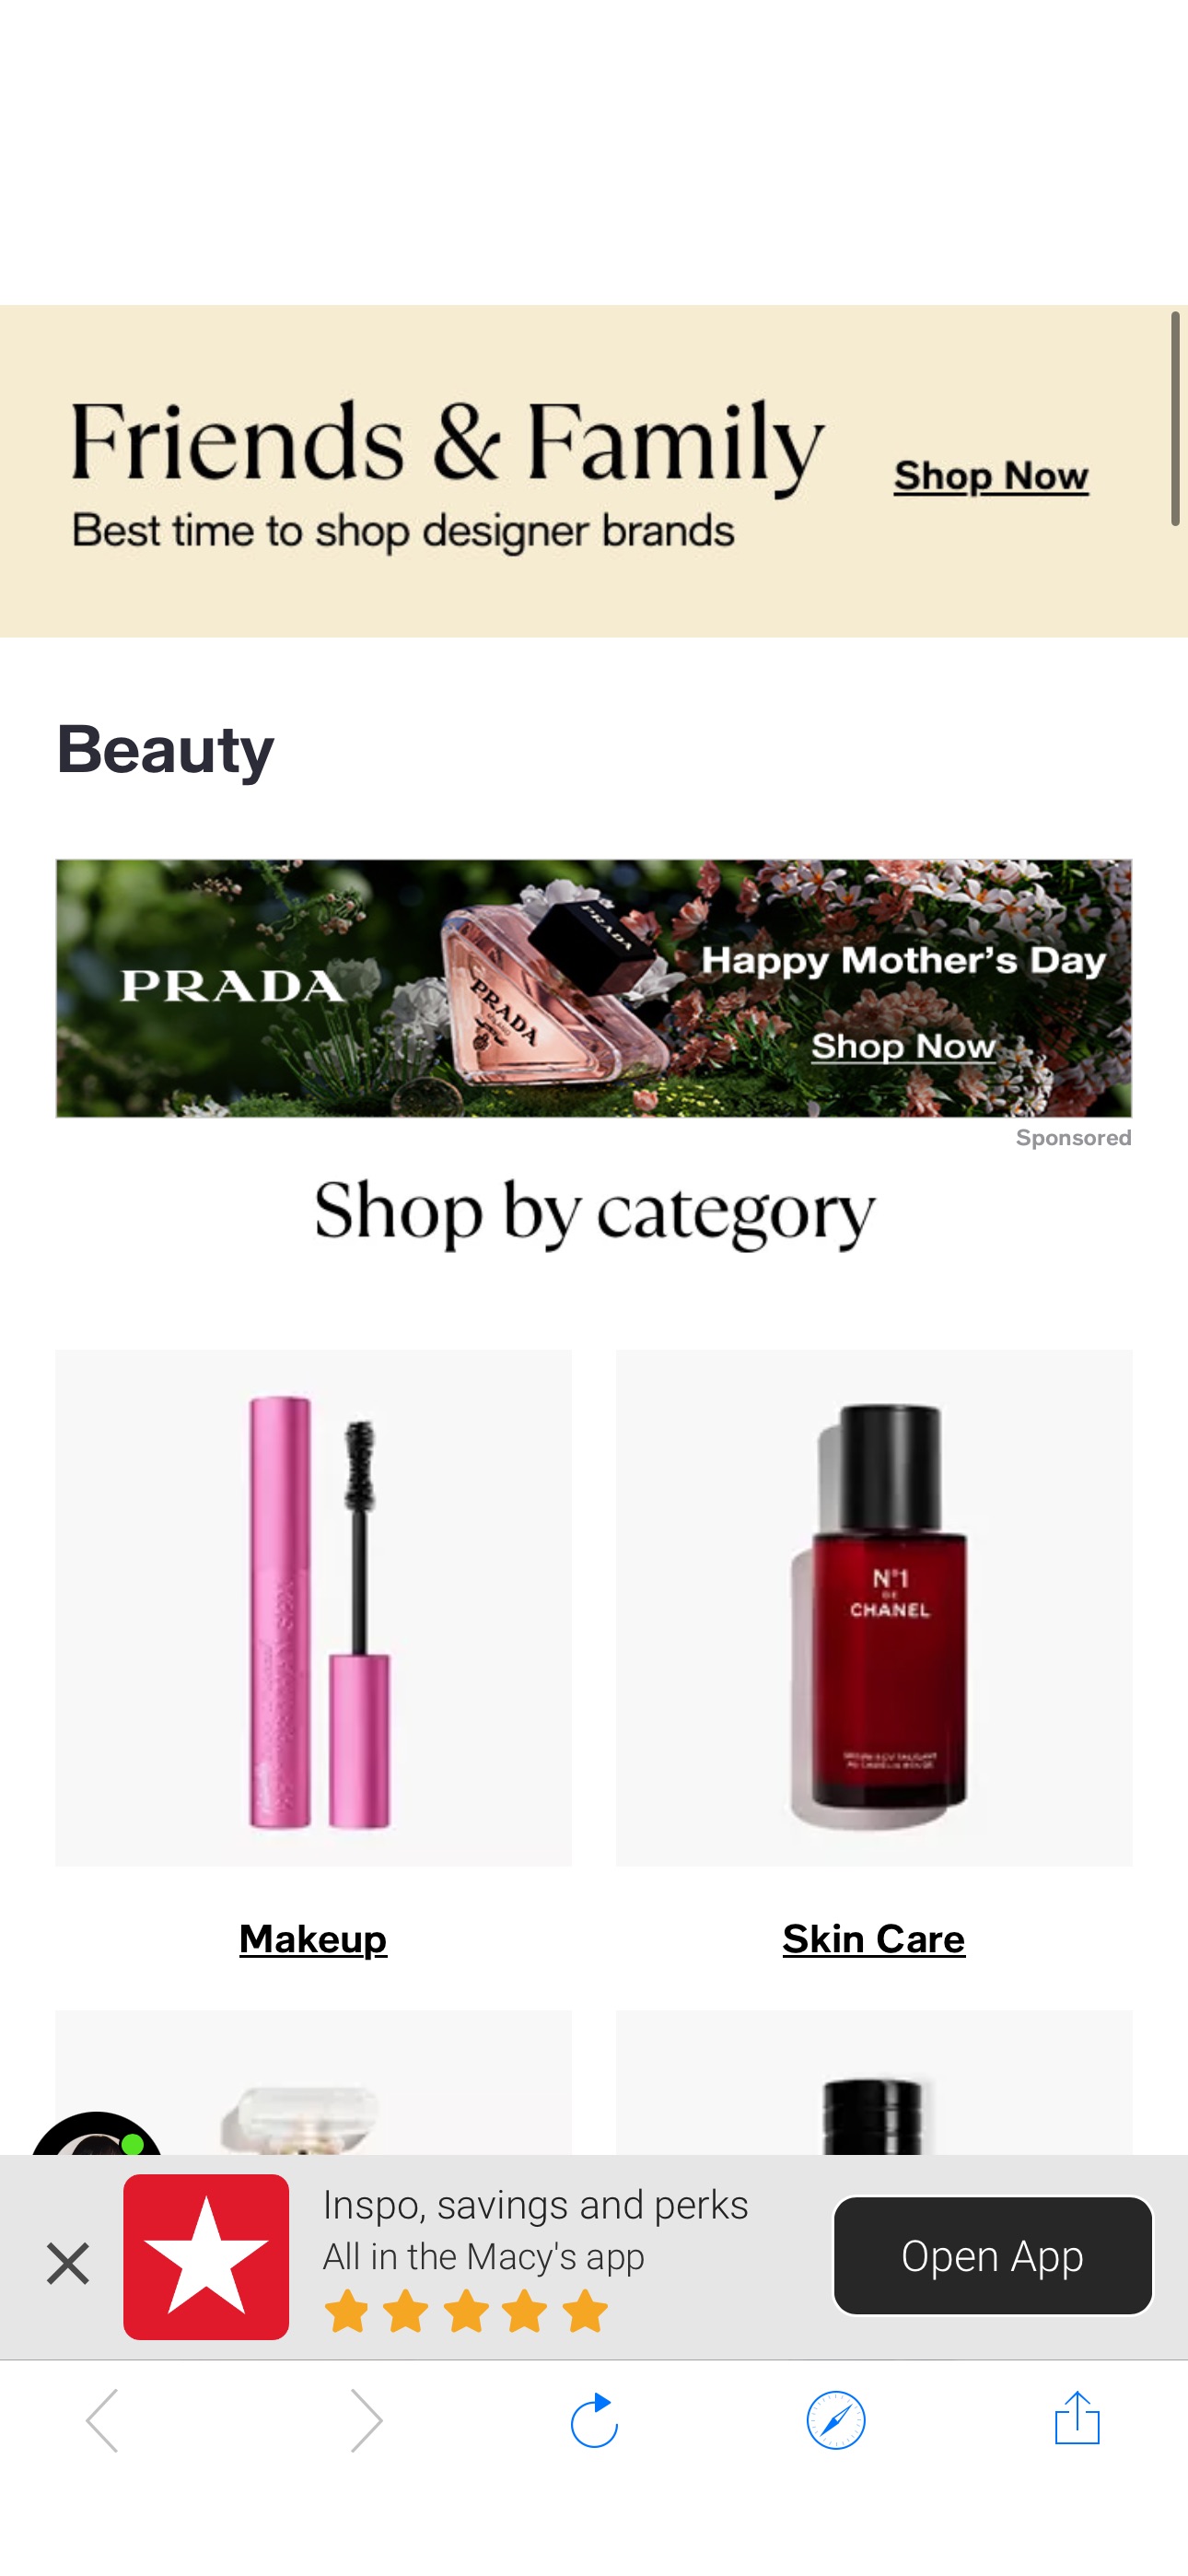 Beauty: Makeup, Skin Care & Cosmetics - Macy's Designer Fragrance Sale
Extra 15% off with code: FRIEND